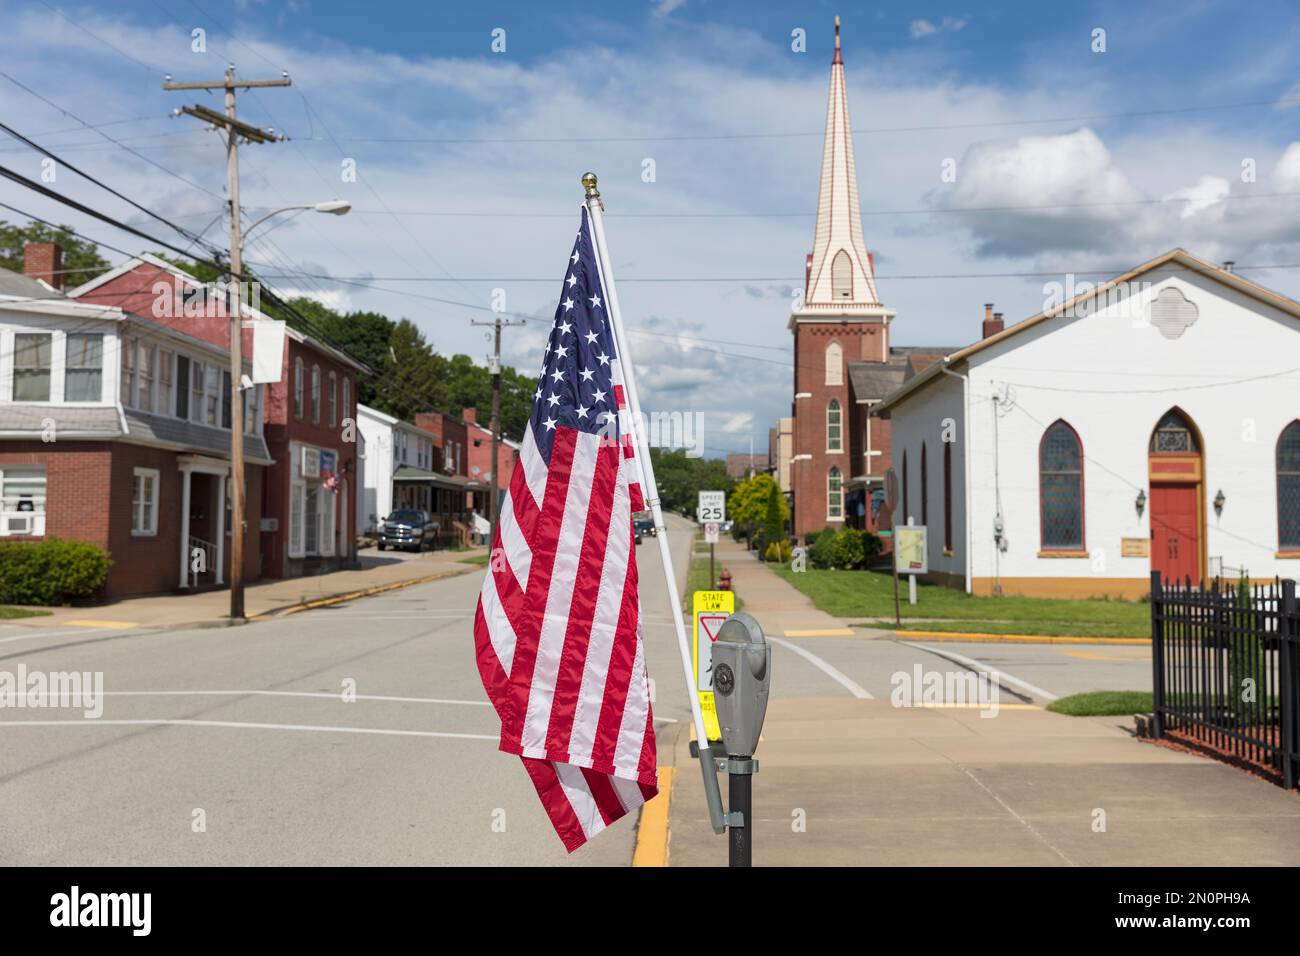 American flag flying on a quiet main street with houses and a church. Stock Photo